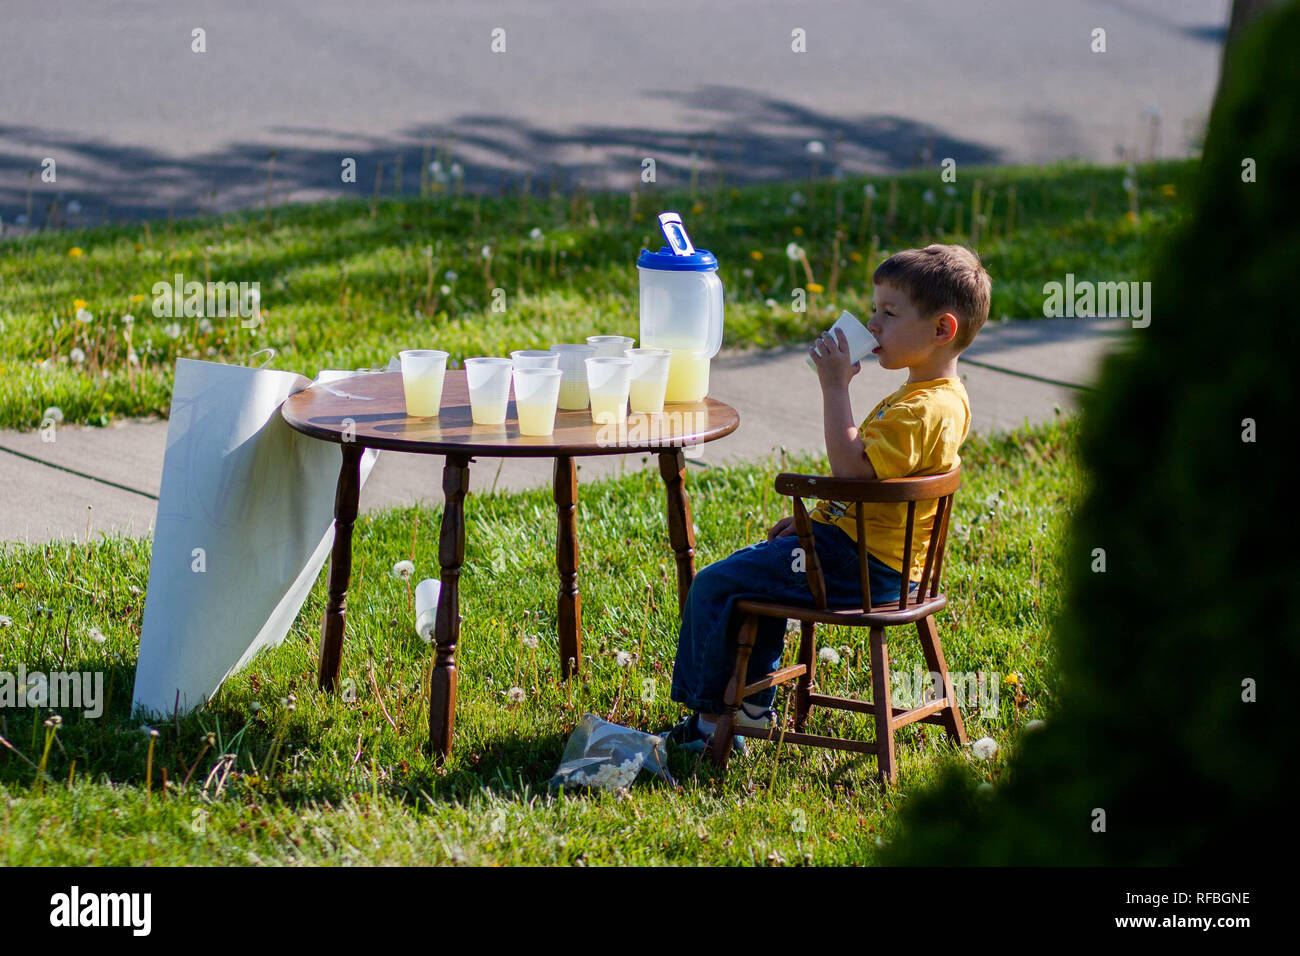 https://c8.alamy.com/comp/RFBGNE/a-5-year-old-boy-sits-at-a-lemonade-stand-with-cups-and-a-pitcher-of-lemonade-RFBGNE.jpg